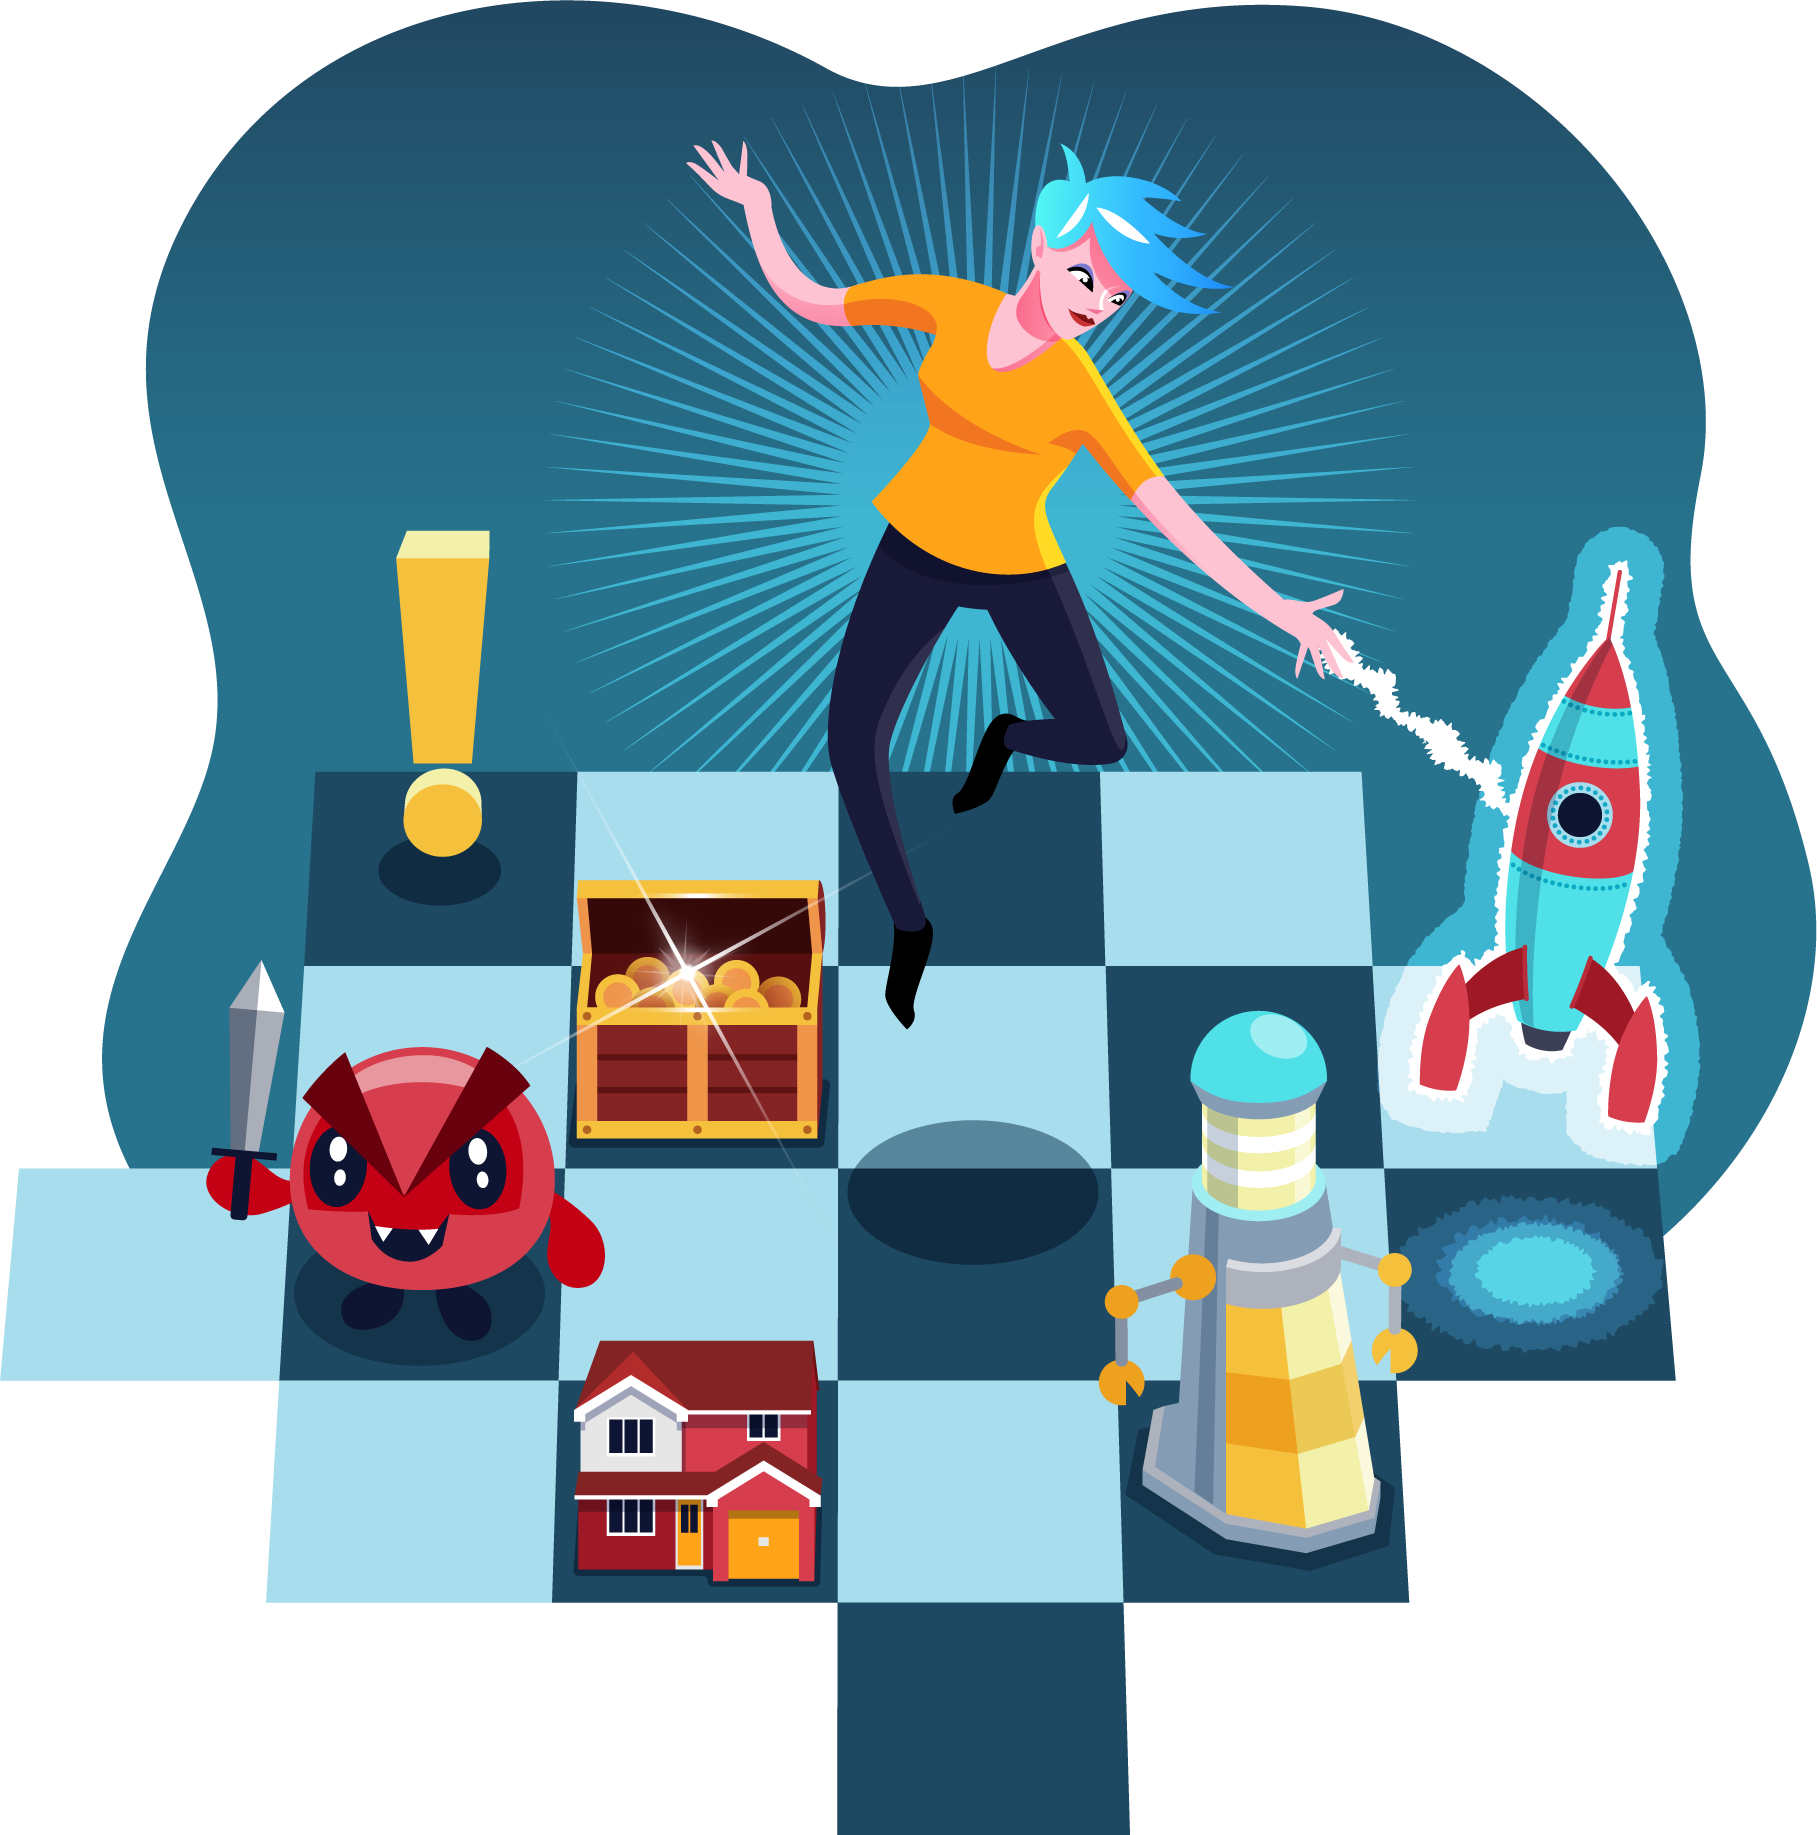 Game Planning illustration - articy avatar moving game pieces on a chess board